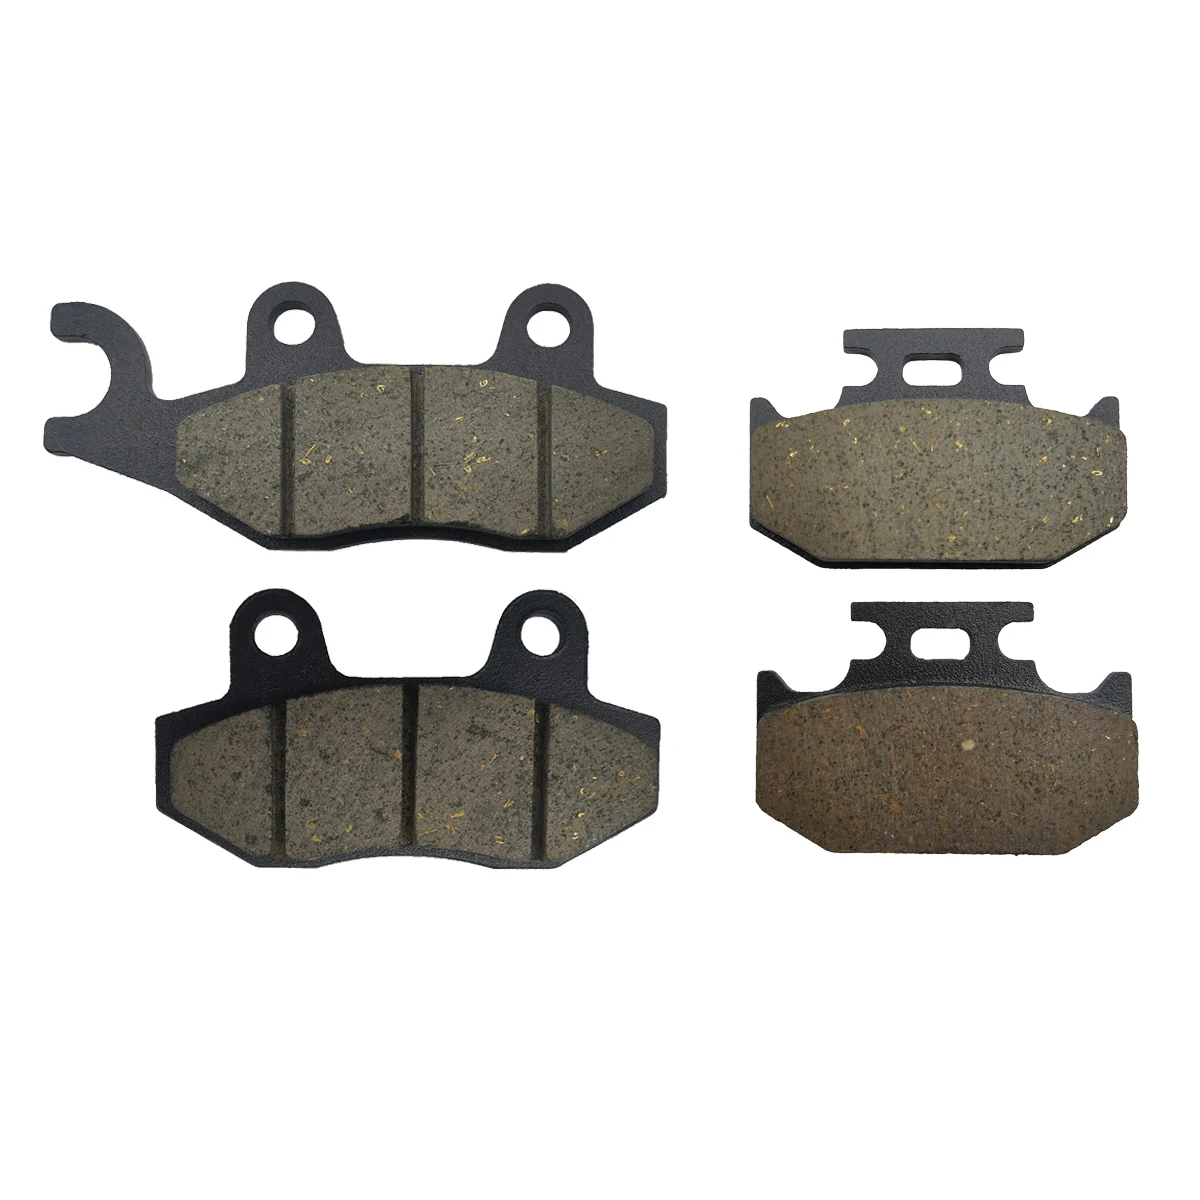 

Motocycle Front and Rear Brake Pads For Kawasaki KX 125 250 500 G1 H1 H2 J1 J2 K1 KDX200 KDX250 E1 E6 DX G SR 250 F1 D1 D2 D3 D4